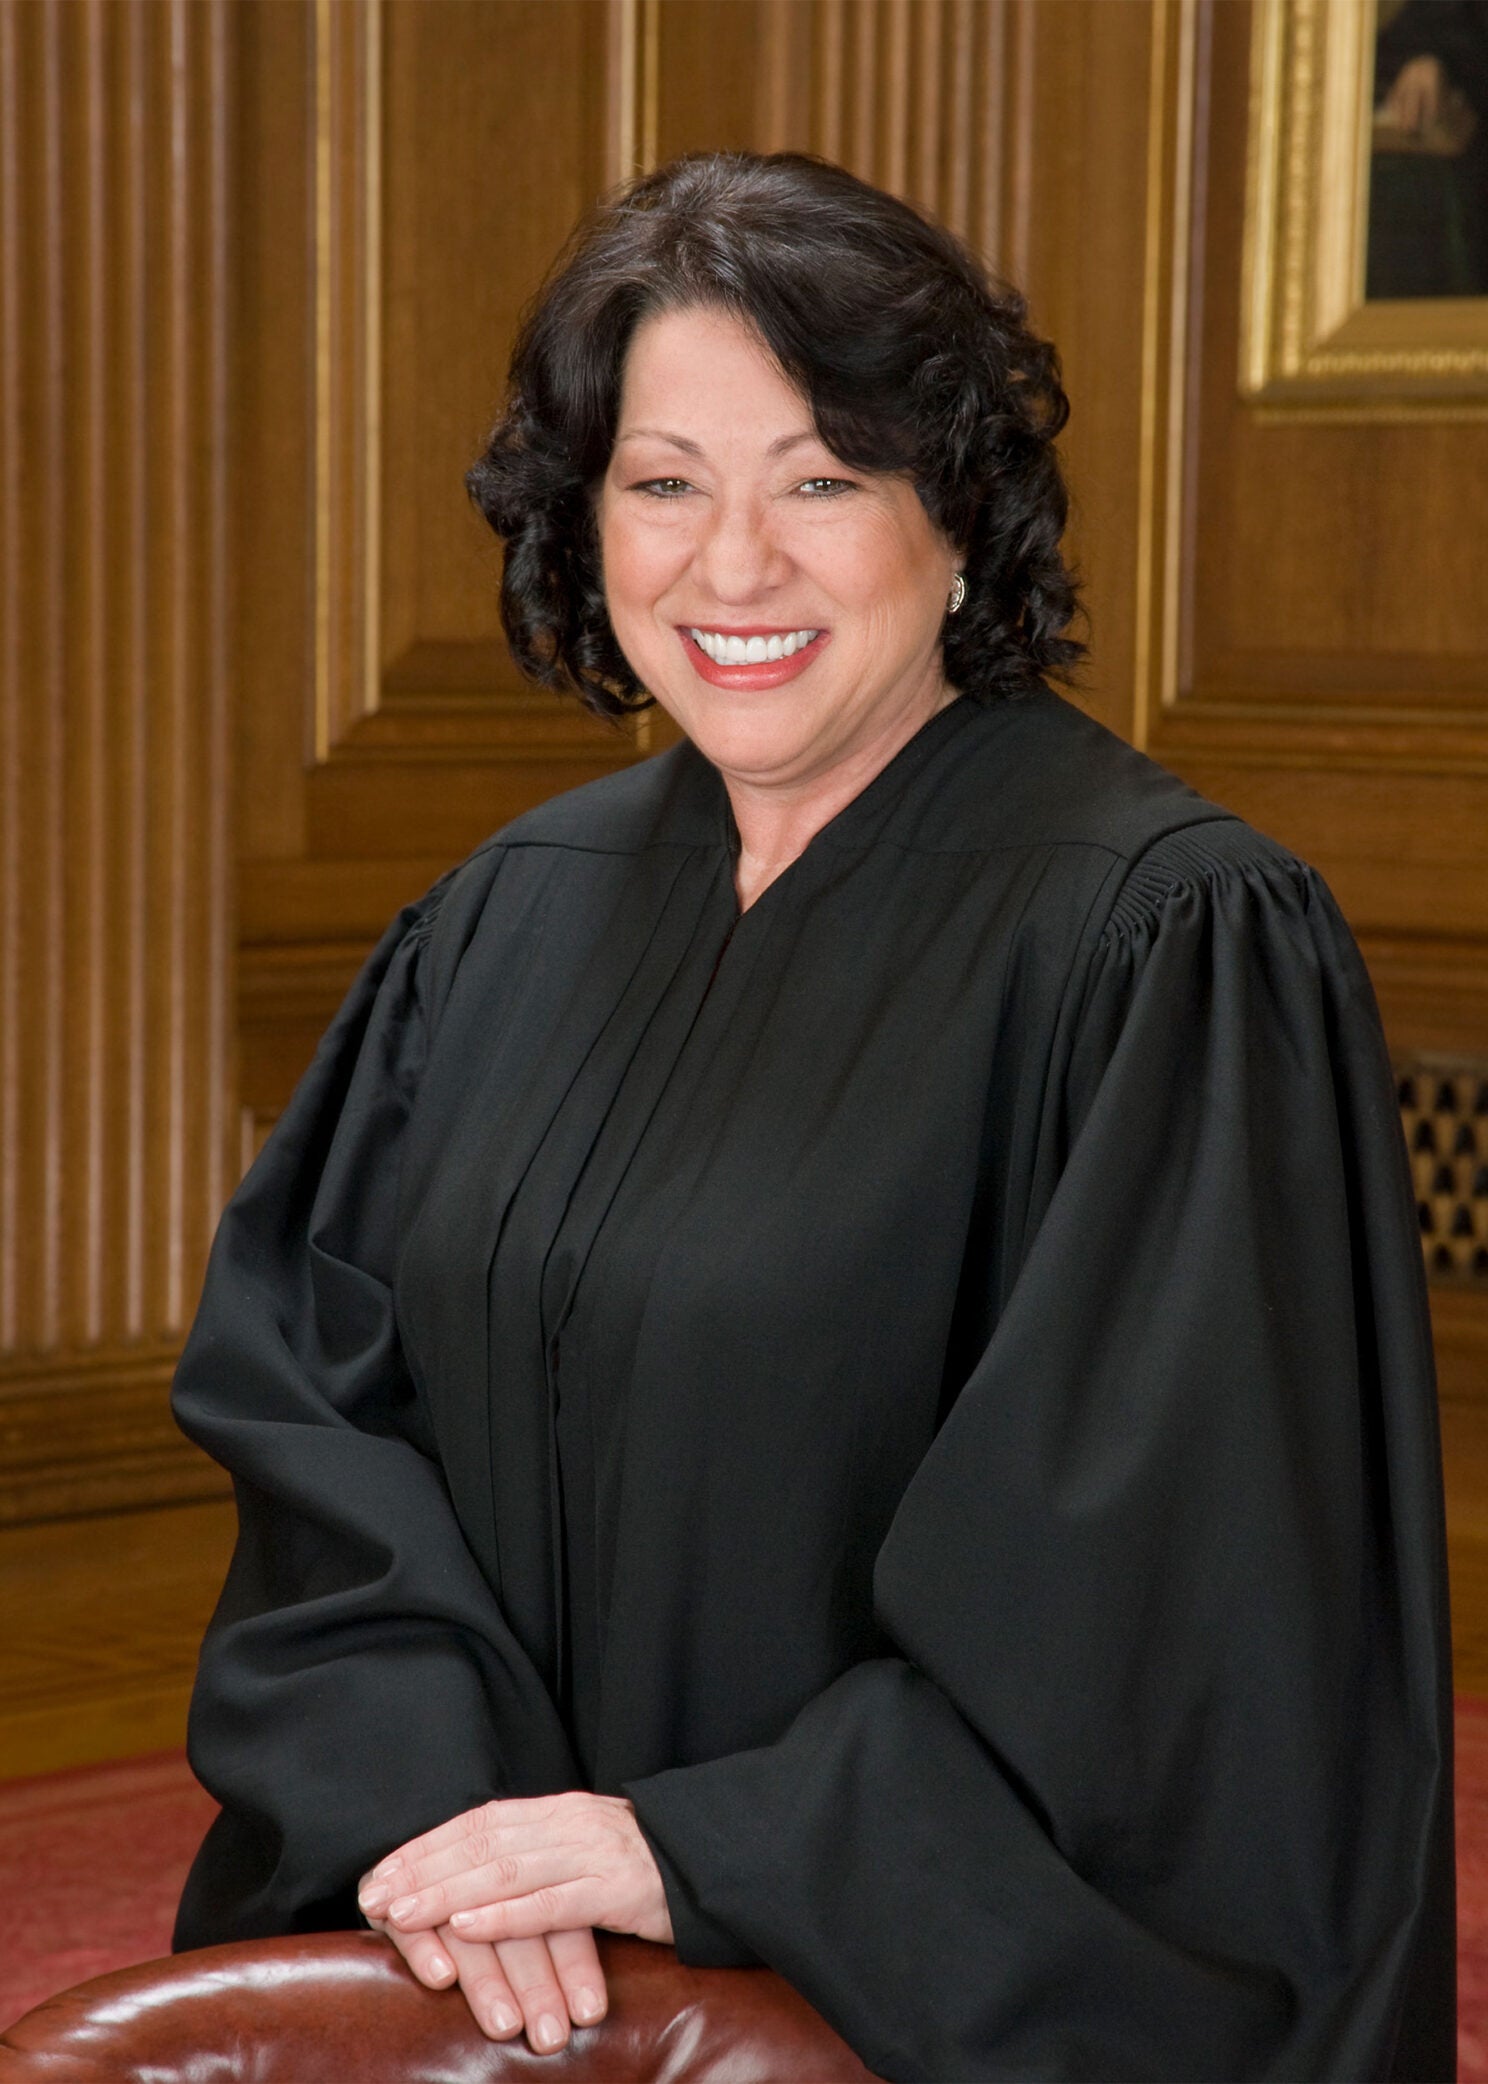 Associate Justice of the U.S. Supreme Court Sonia Sotomayor.